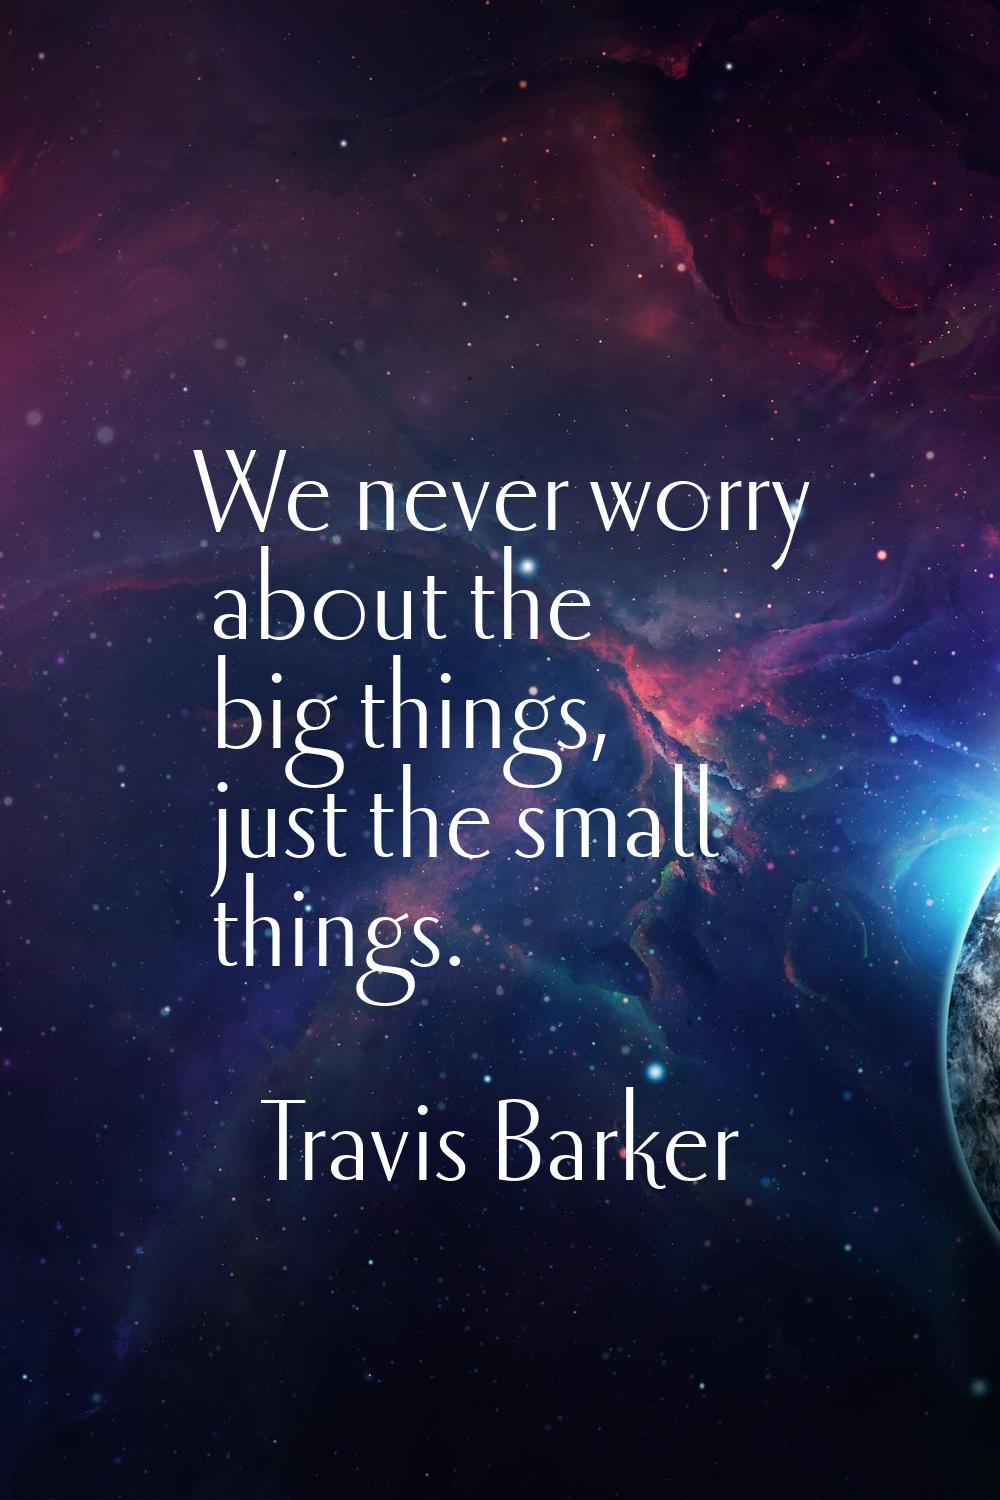 We never worry about the big things, just the small things.